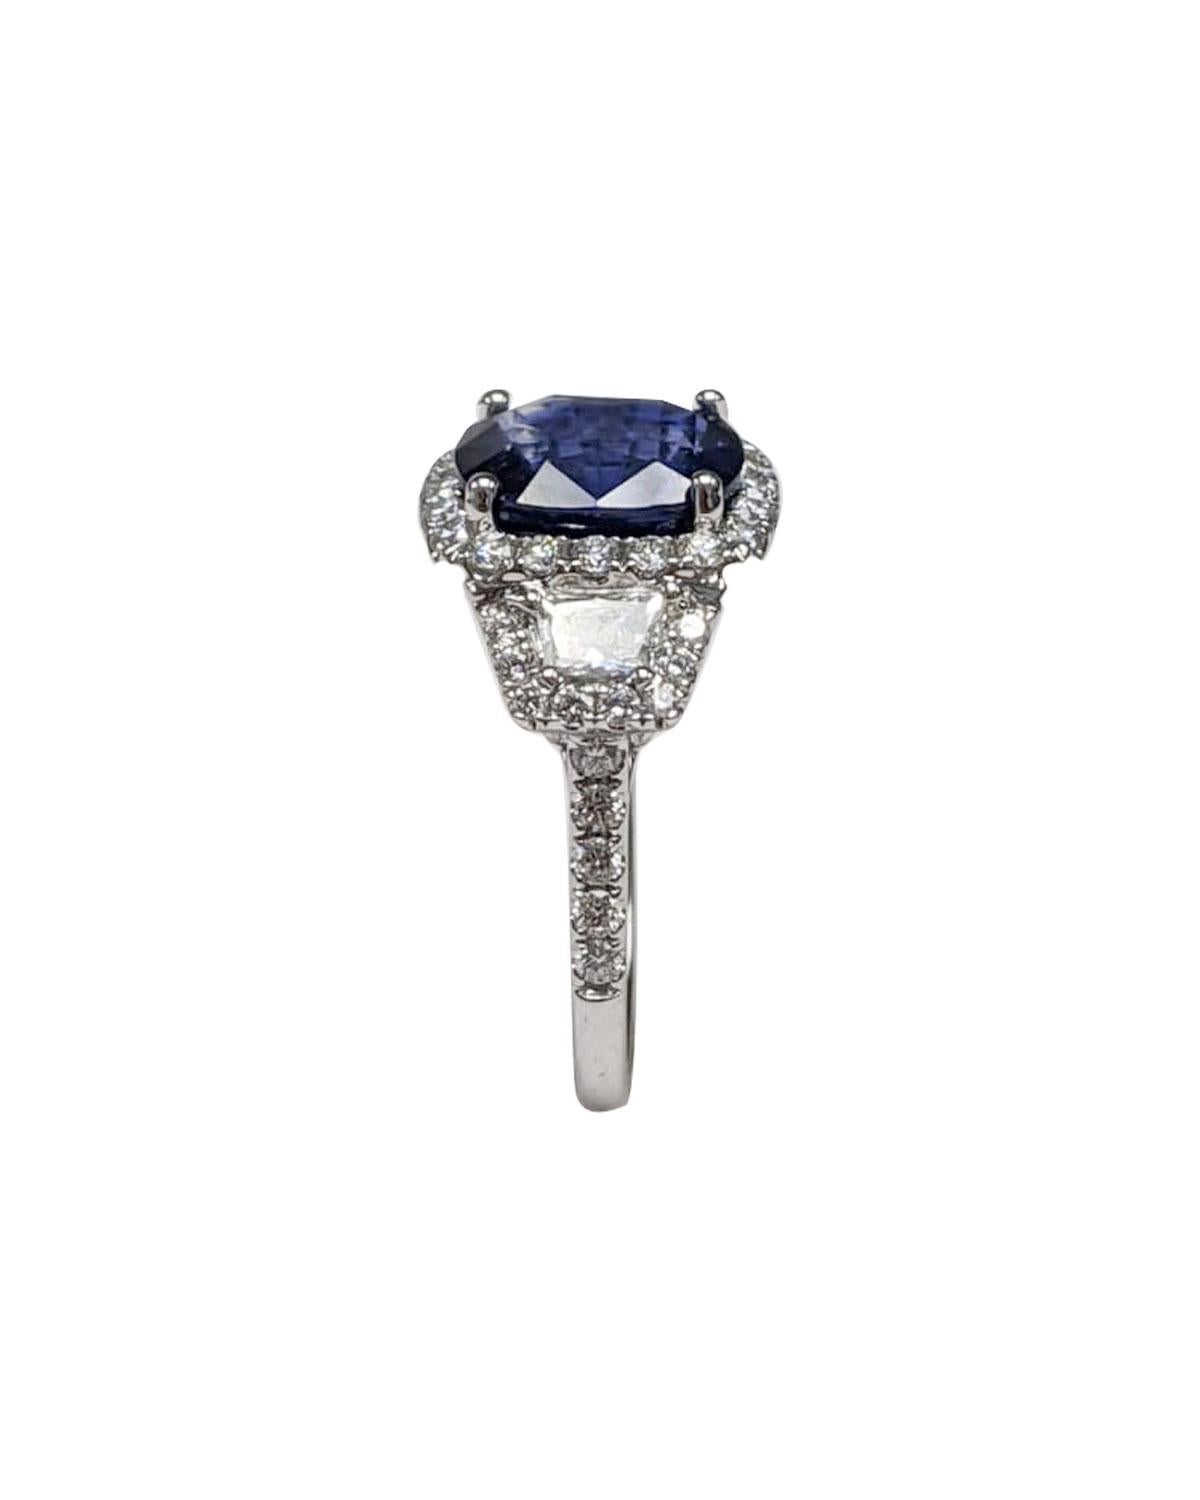 GIA Certified Sapphire White Diamond Ring, 18k White Gold
Hand made Ring with top craftsmanship , 
Set with a Very fine AAAA Gem quality Genuine Saph. (10x9 mm)  4.79 crts
Diamonds: G color and VS clarity. (48 Rd. and 2 Trapezoids)